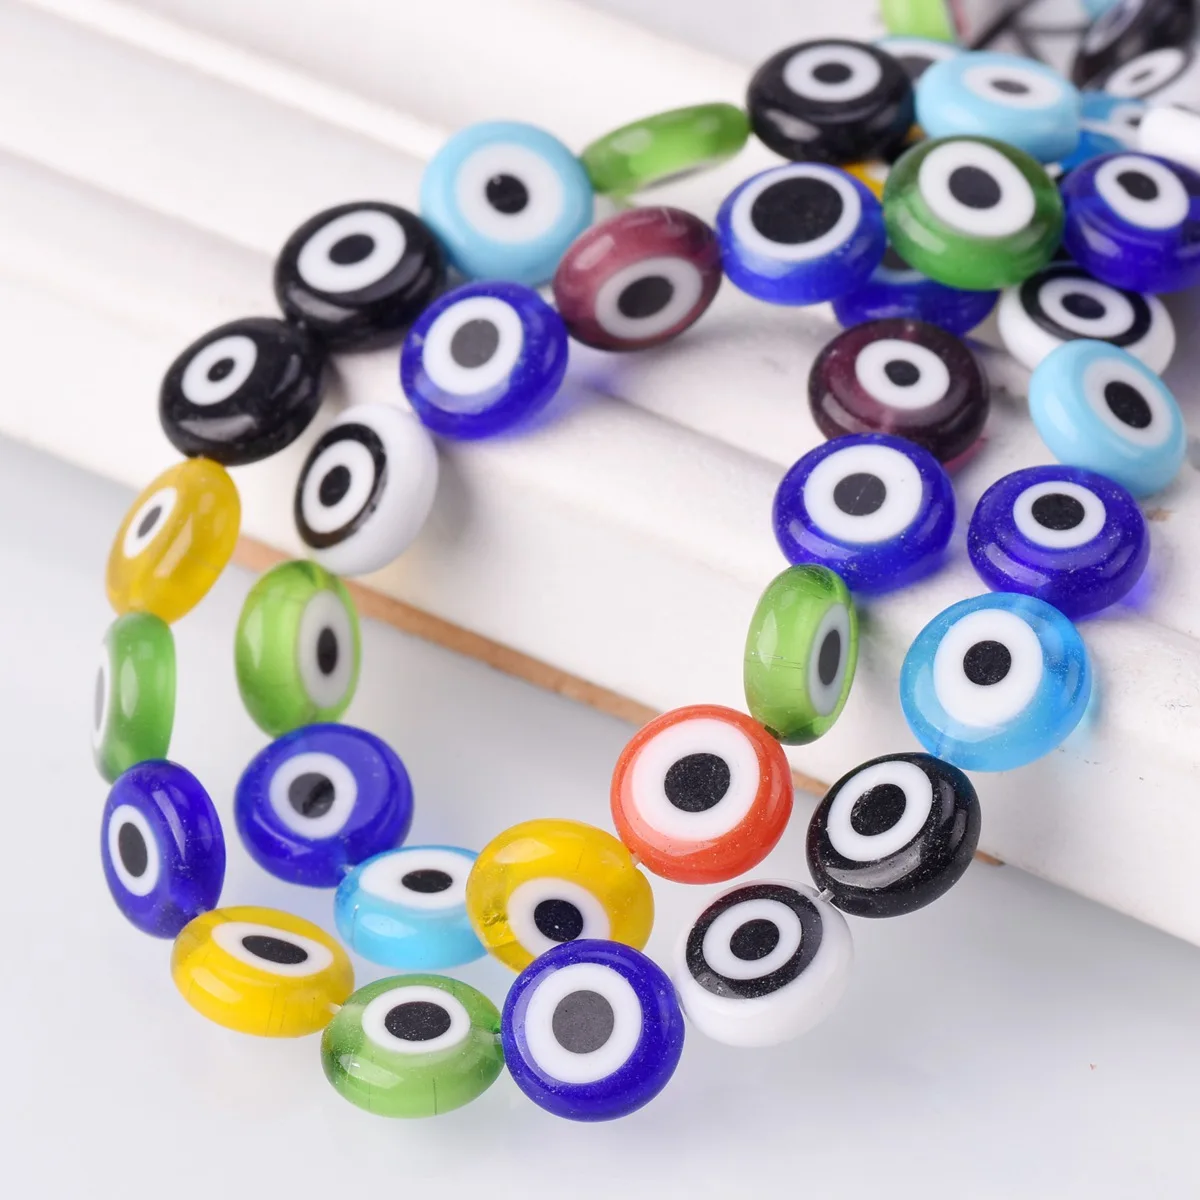 6mm 8mm 10mm 12mm Mixed Flat Round Evil Eye Millefiori Lampwork Glass Beads For Jewelry Making DIY Crafts Findings 100pcs beige flat round resin resin imitation ivory 6mm 8mm 10mm 12mm loose spacer beads wholesale lot for jewelry making